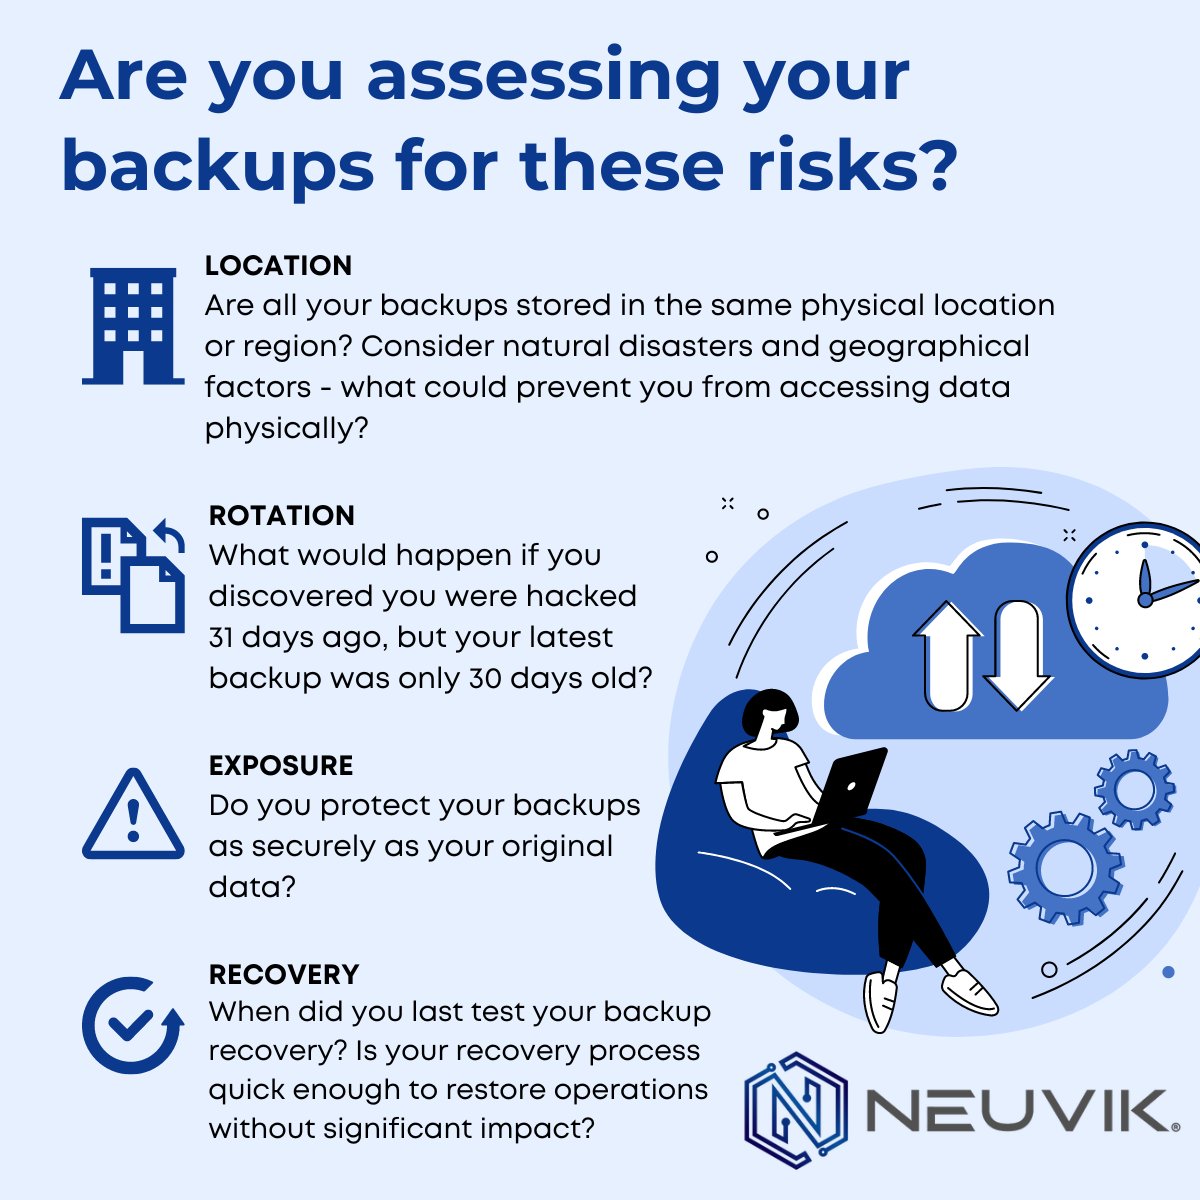 March 31 is #WorldBackupDay, which serves as an annual reminder to safeguard your data. Are you assessing your backups for these risks below? #DataLoss #CyberRisk